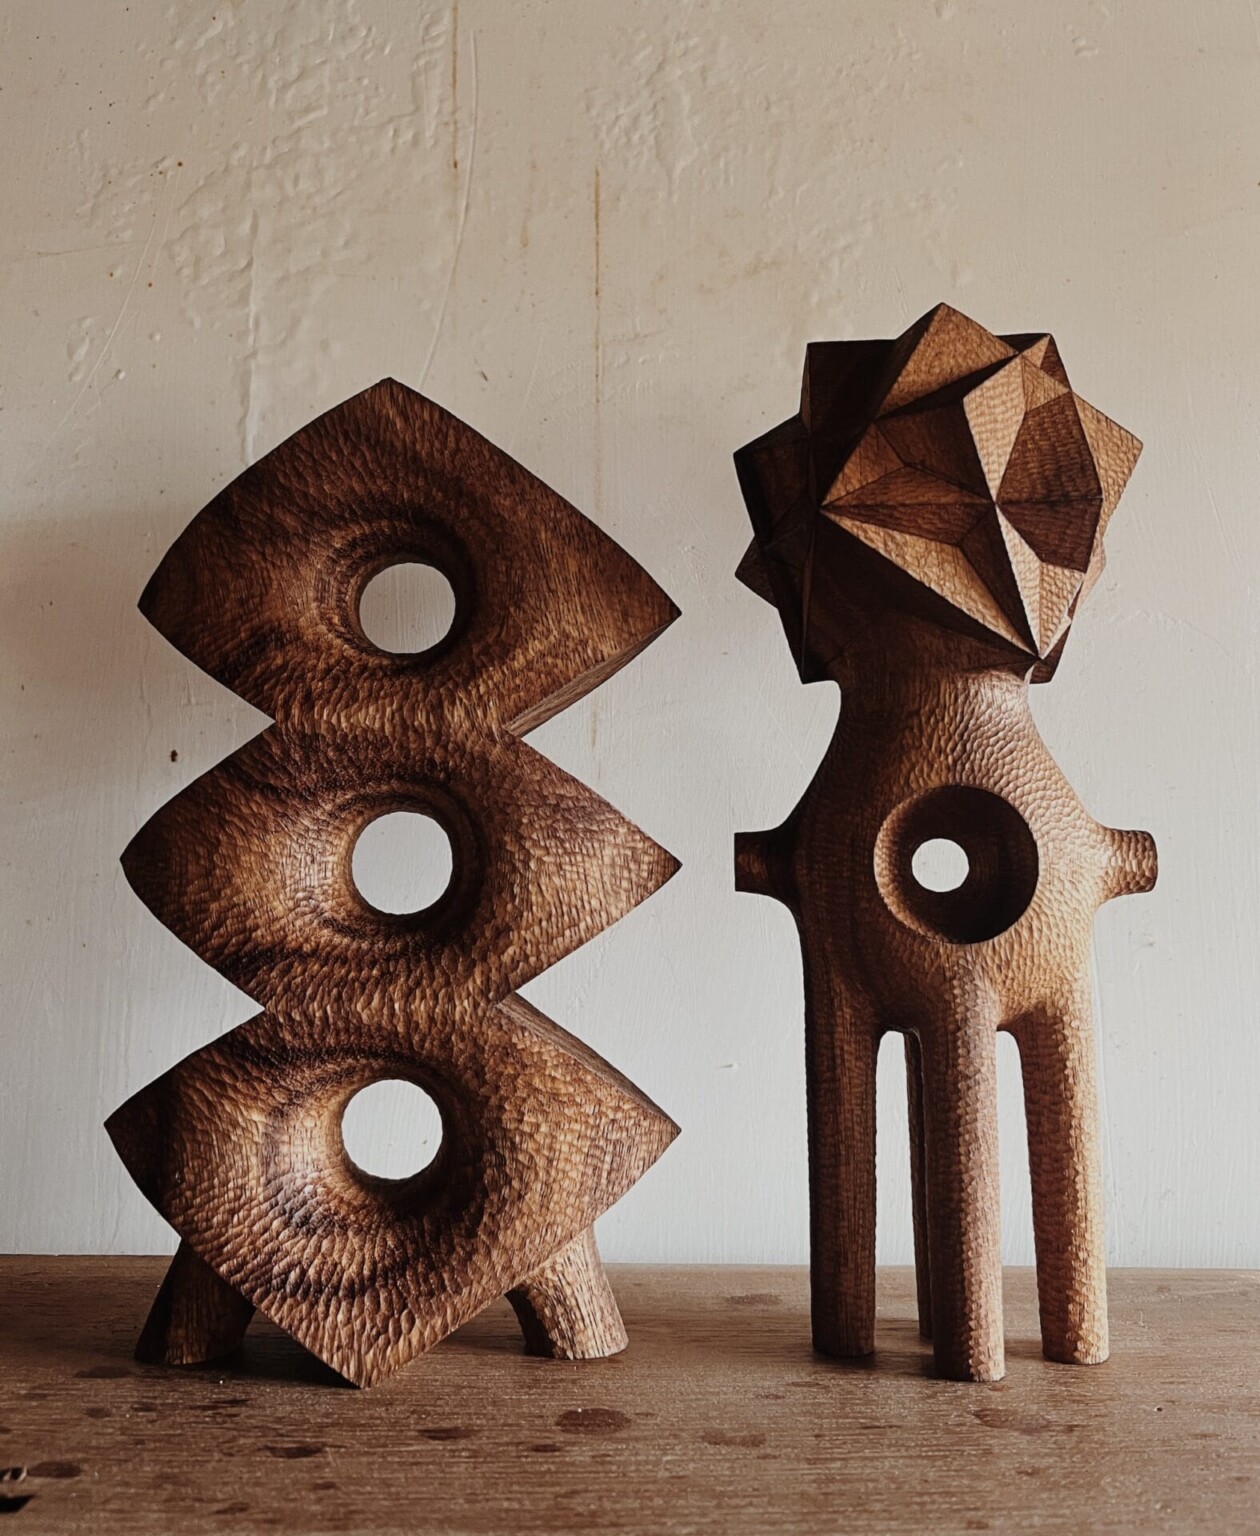 Intriguing Geometric Wood Sculptures By Aleph Geddis (9)